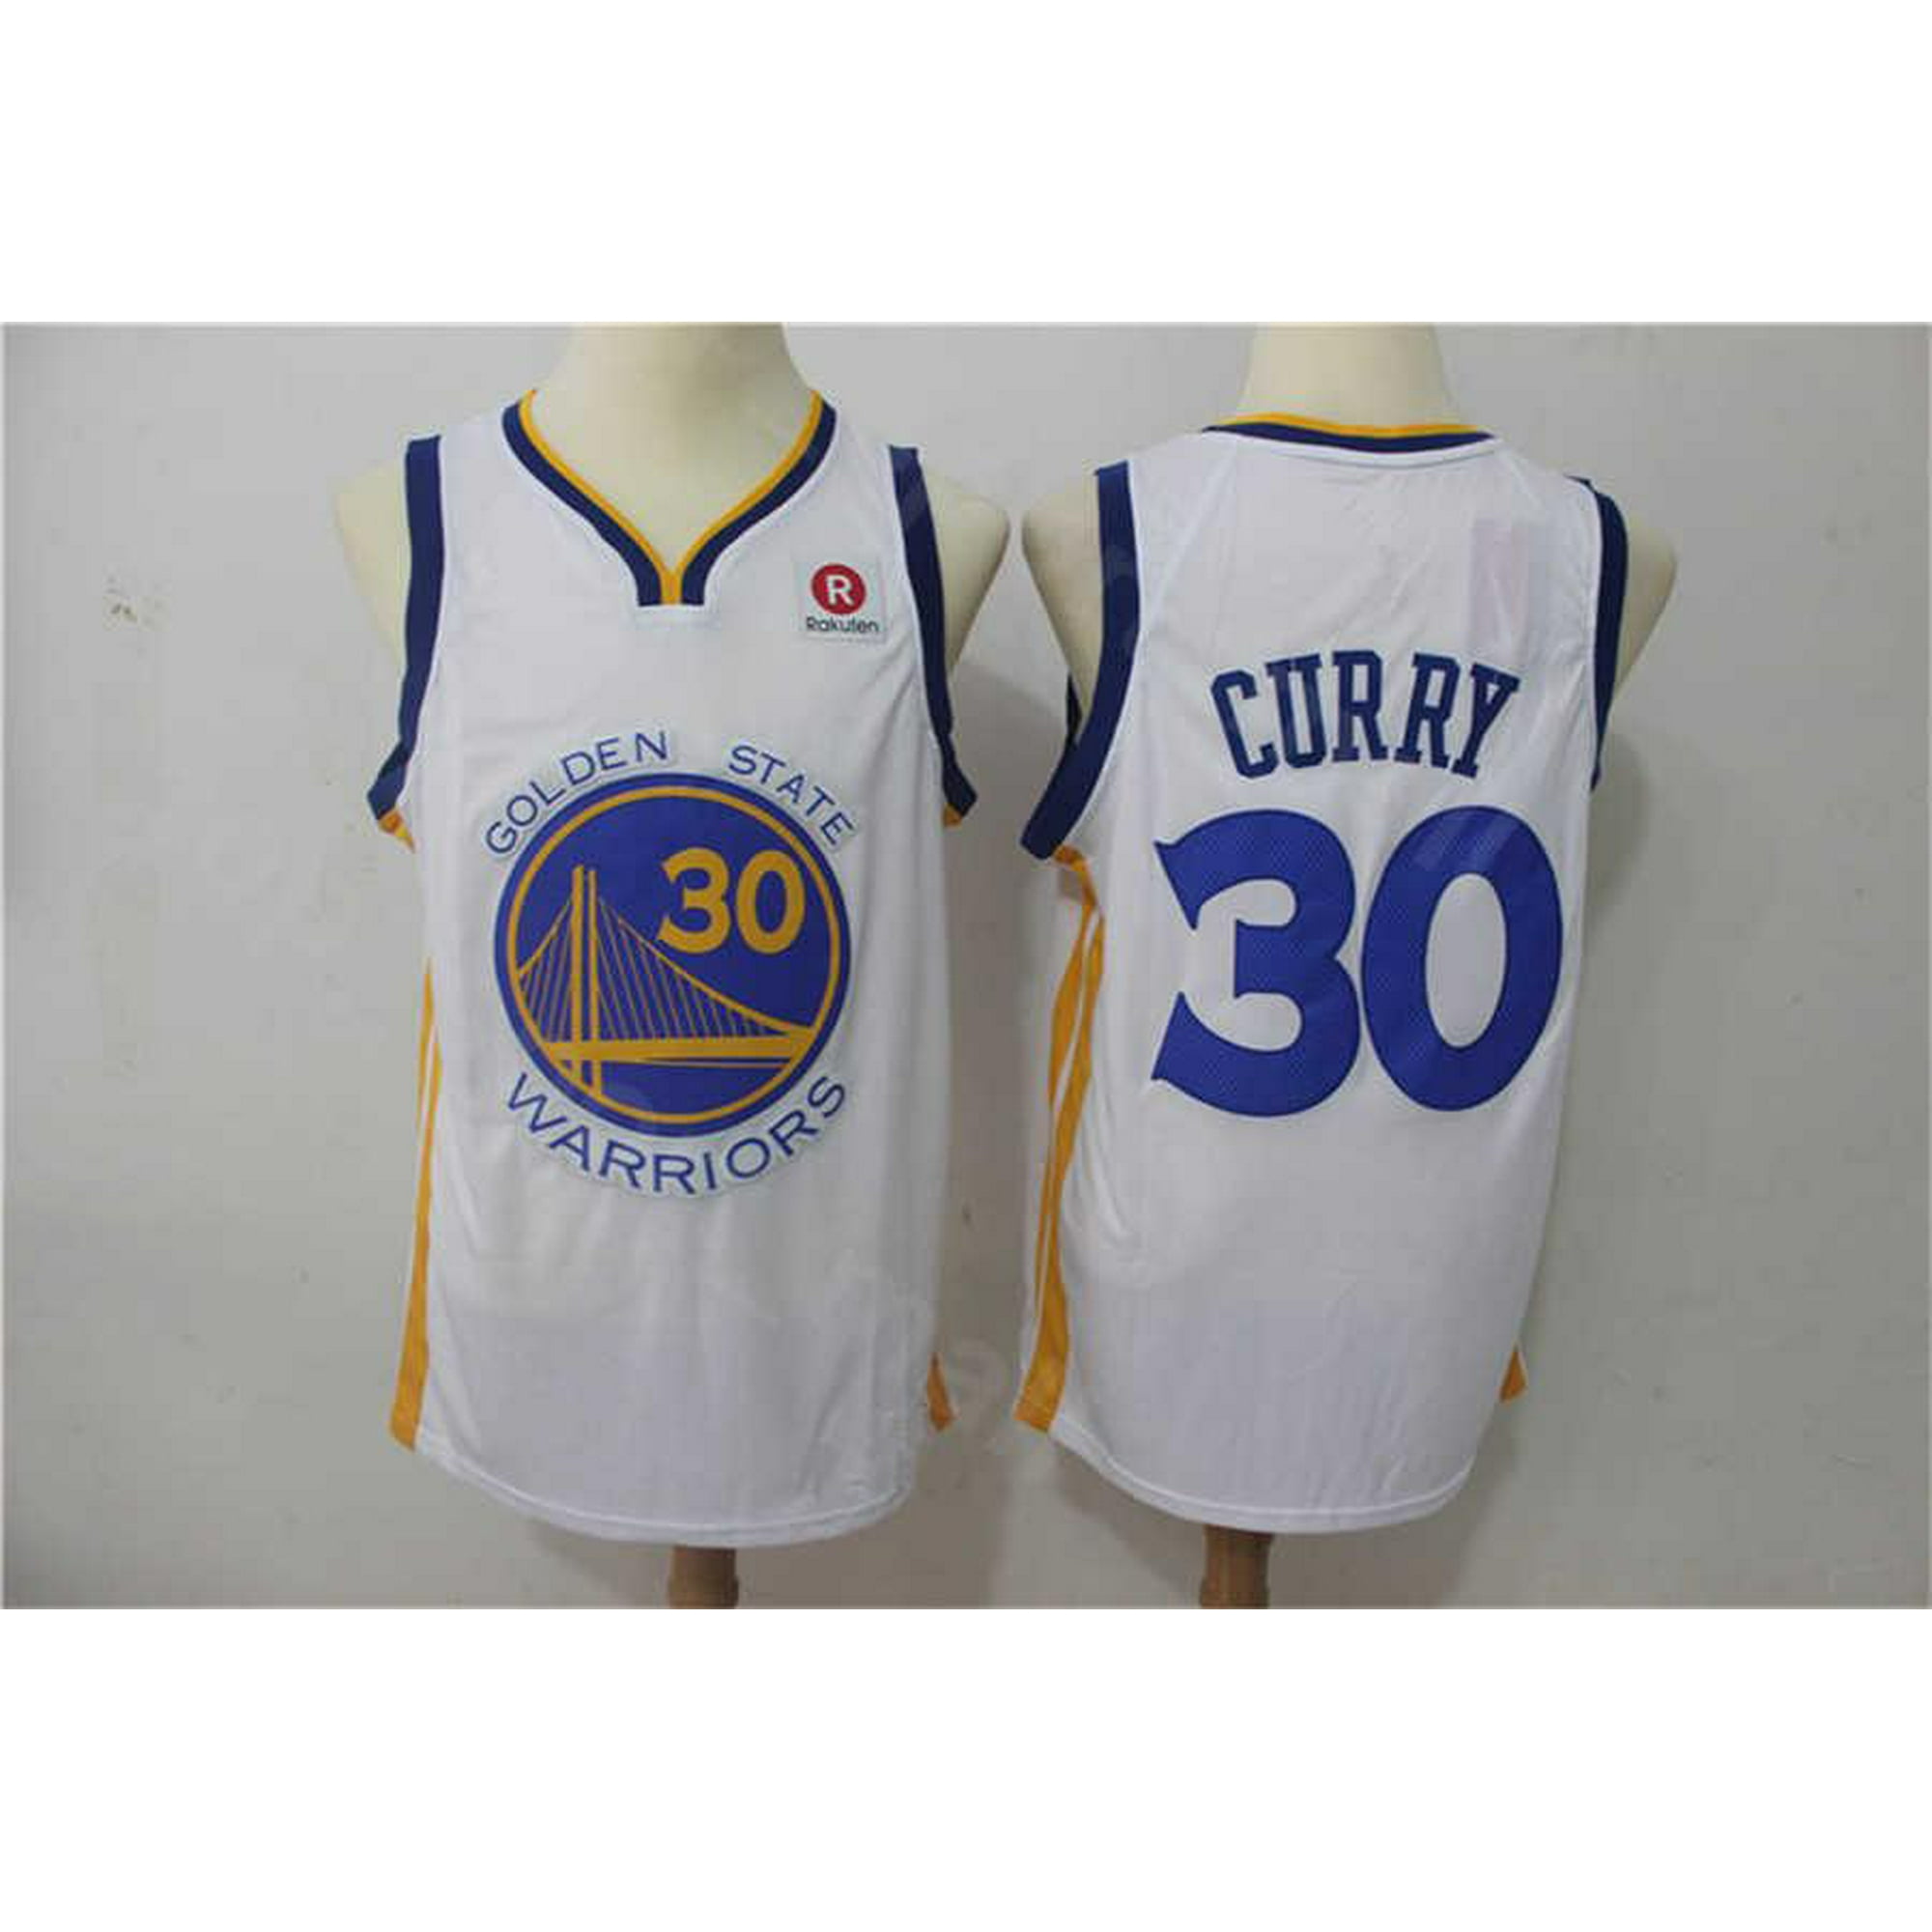 Steph Curry Stitched Jersey Men's NBA Jersey Classic Edition 